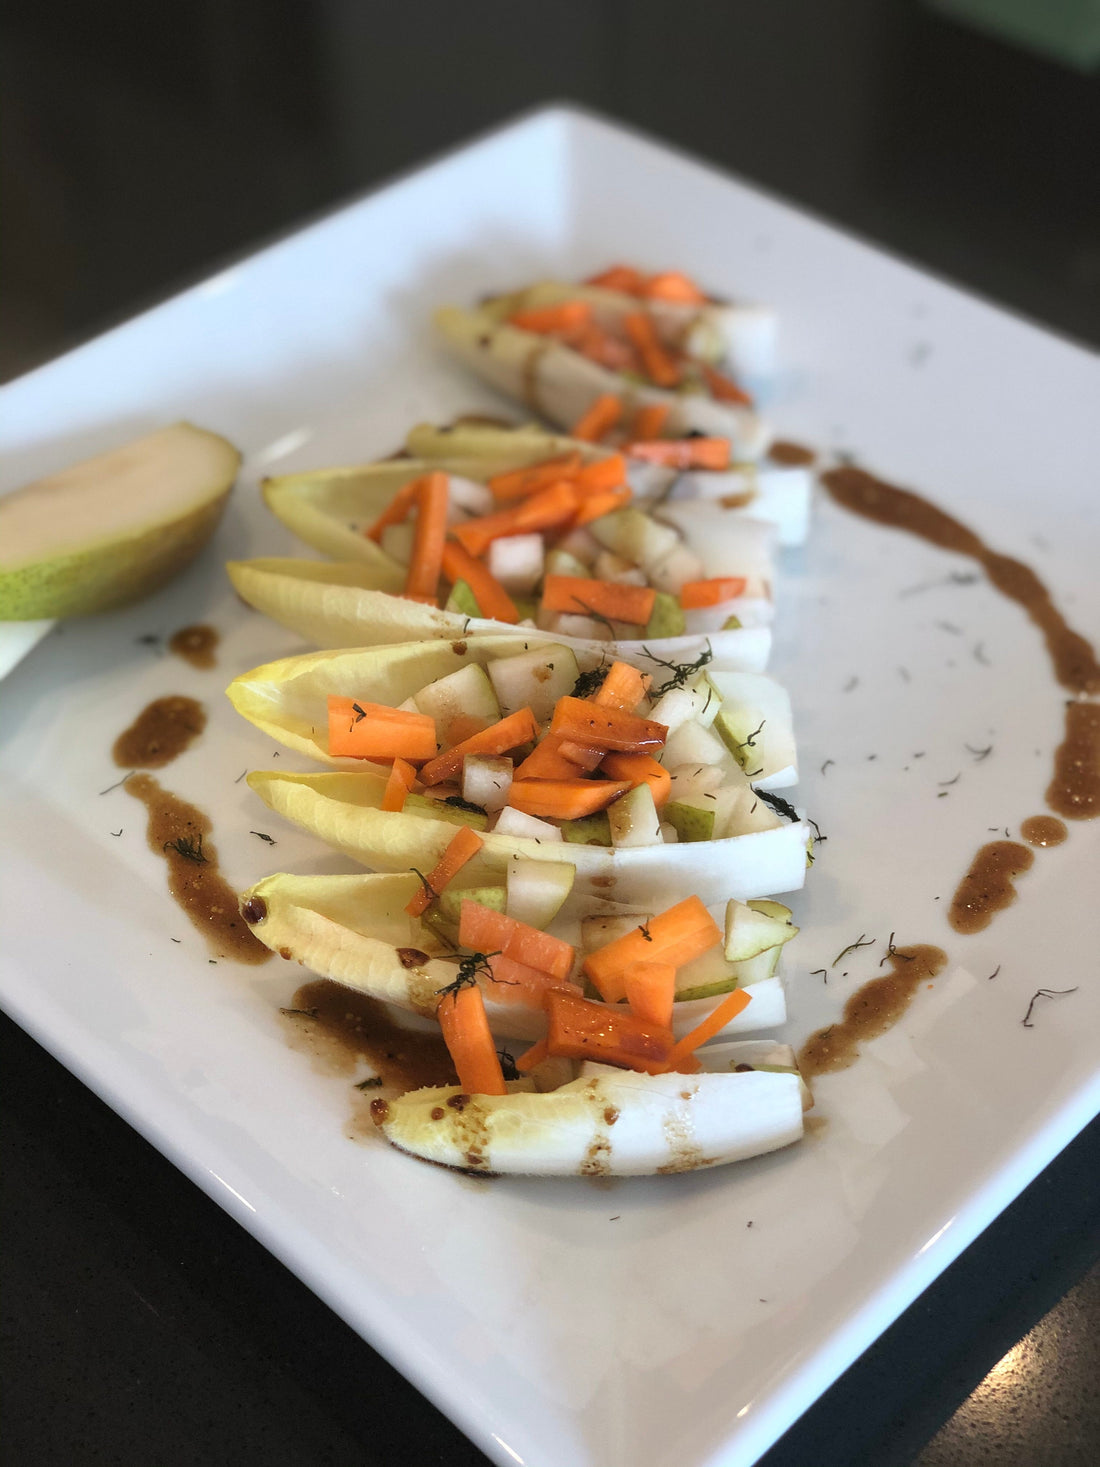 Endive Salad with Pears